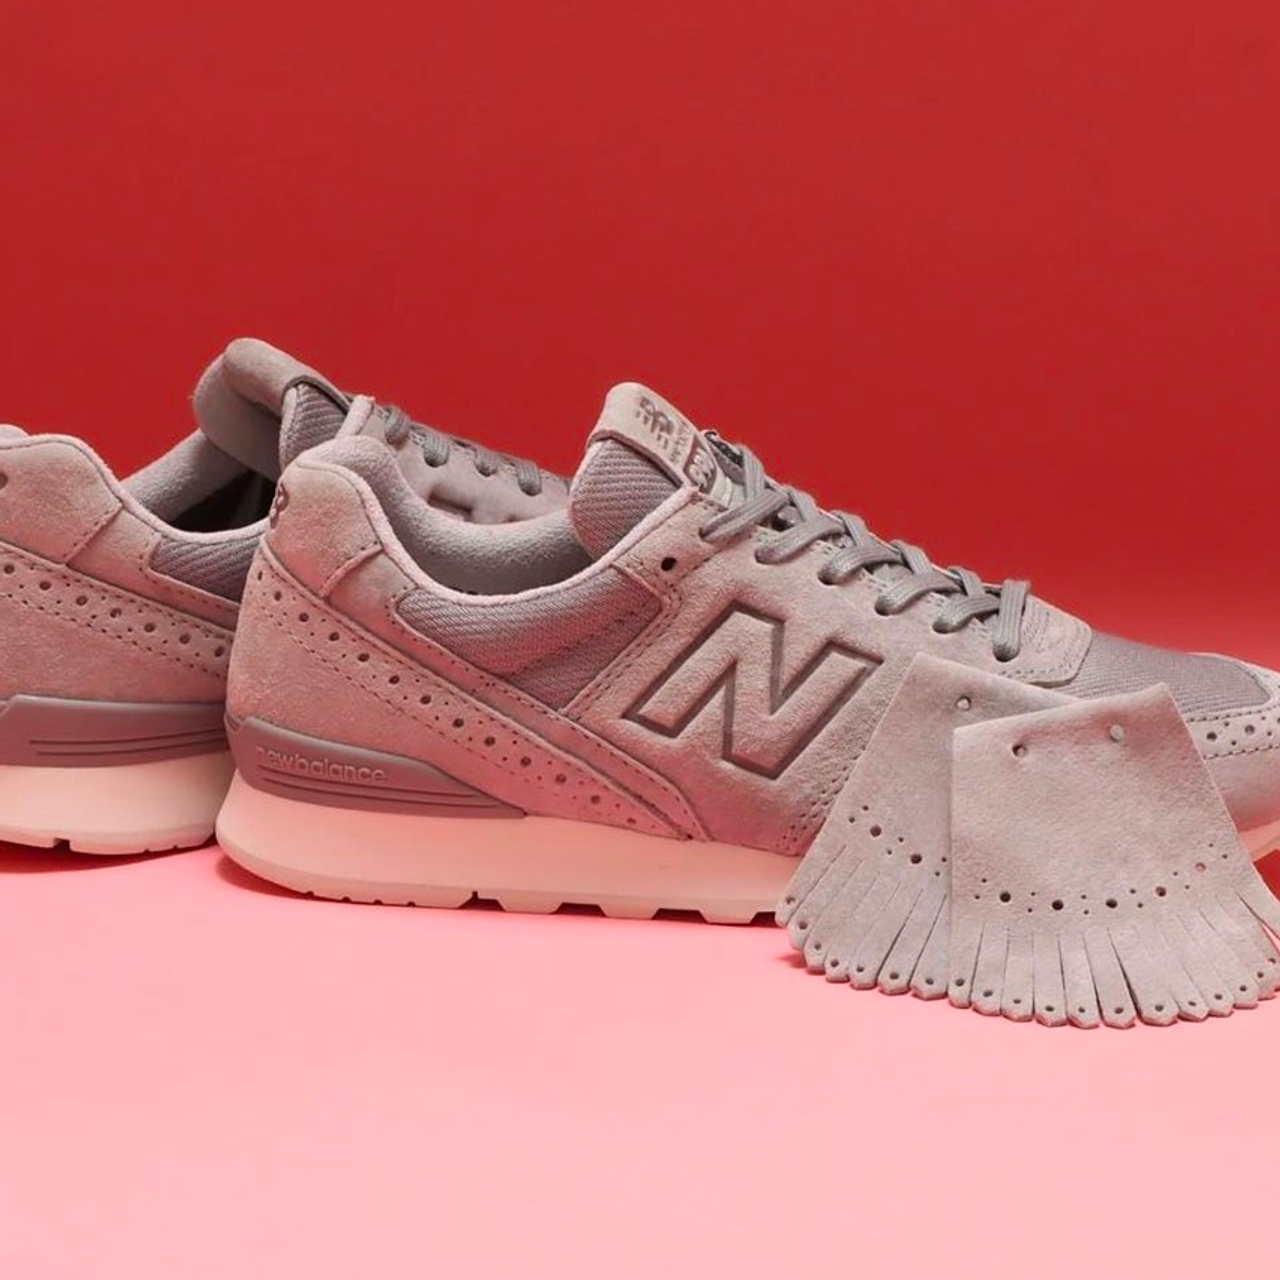 Apt Draw oil The New Balance 996 Goes For Brogue - Sneaker Freaker